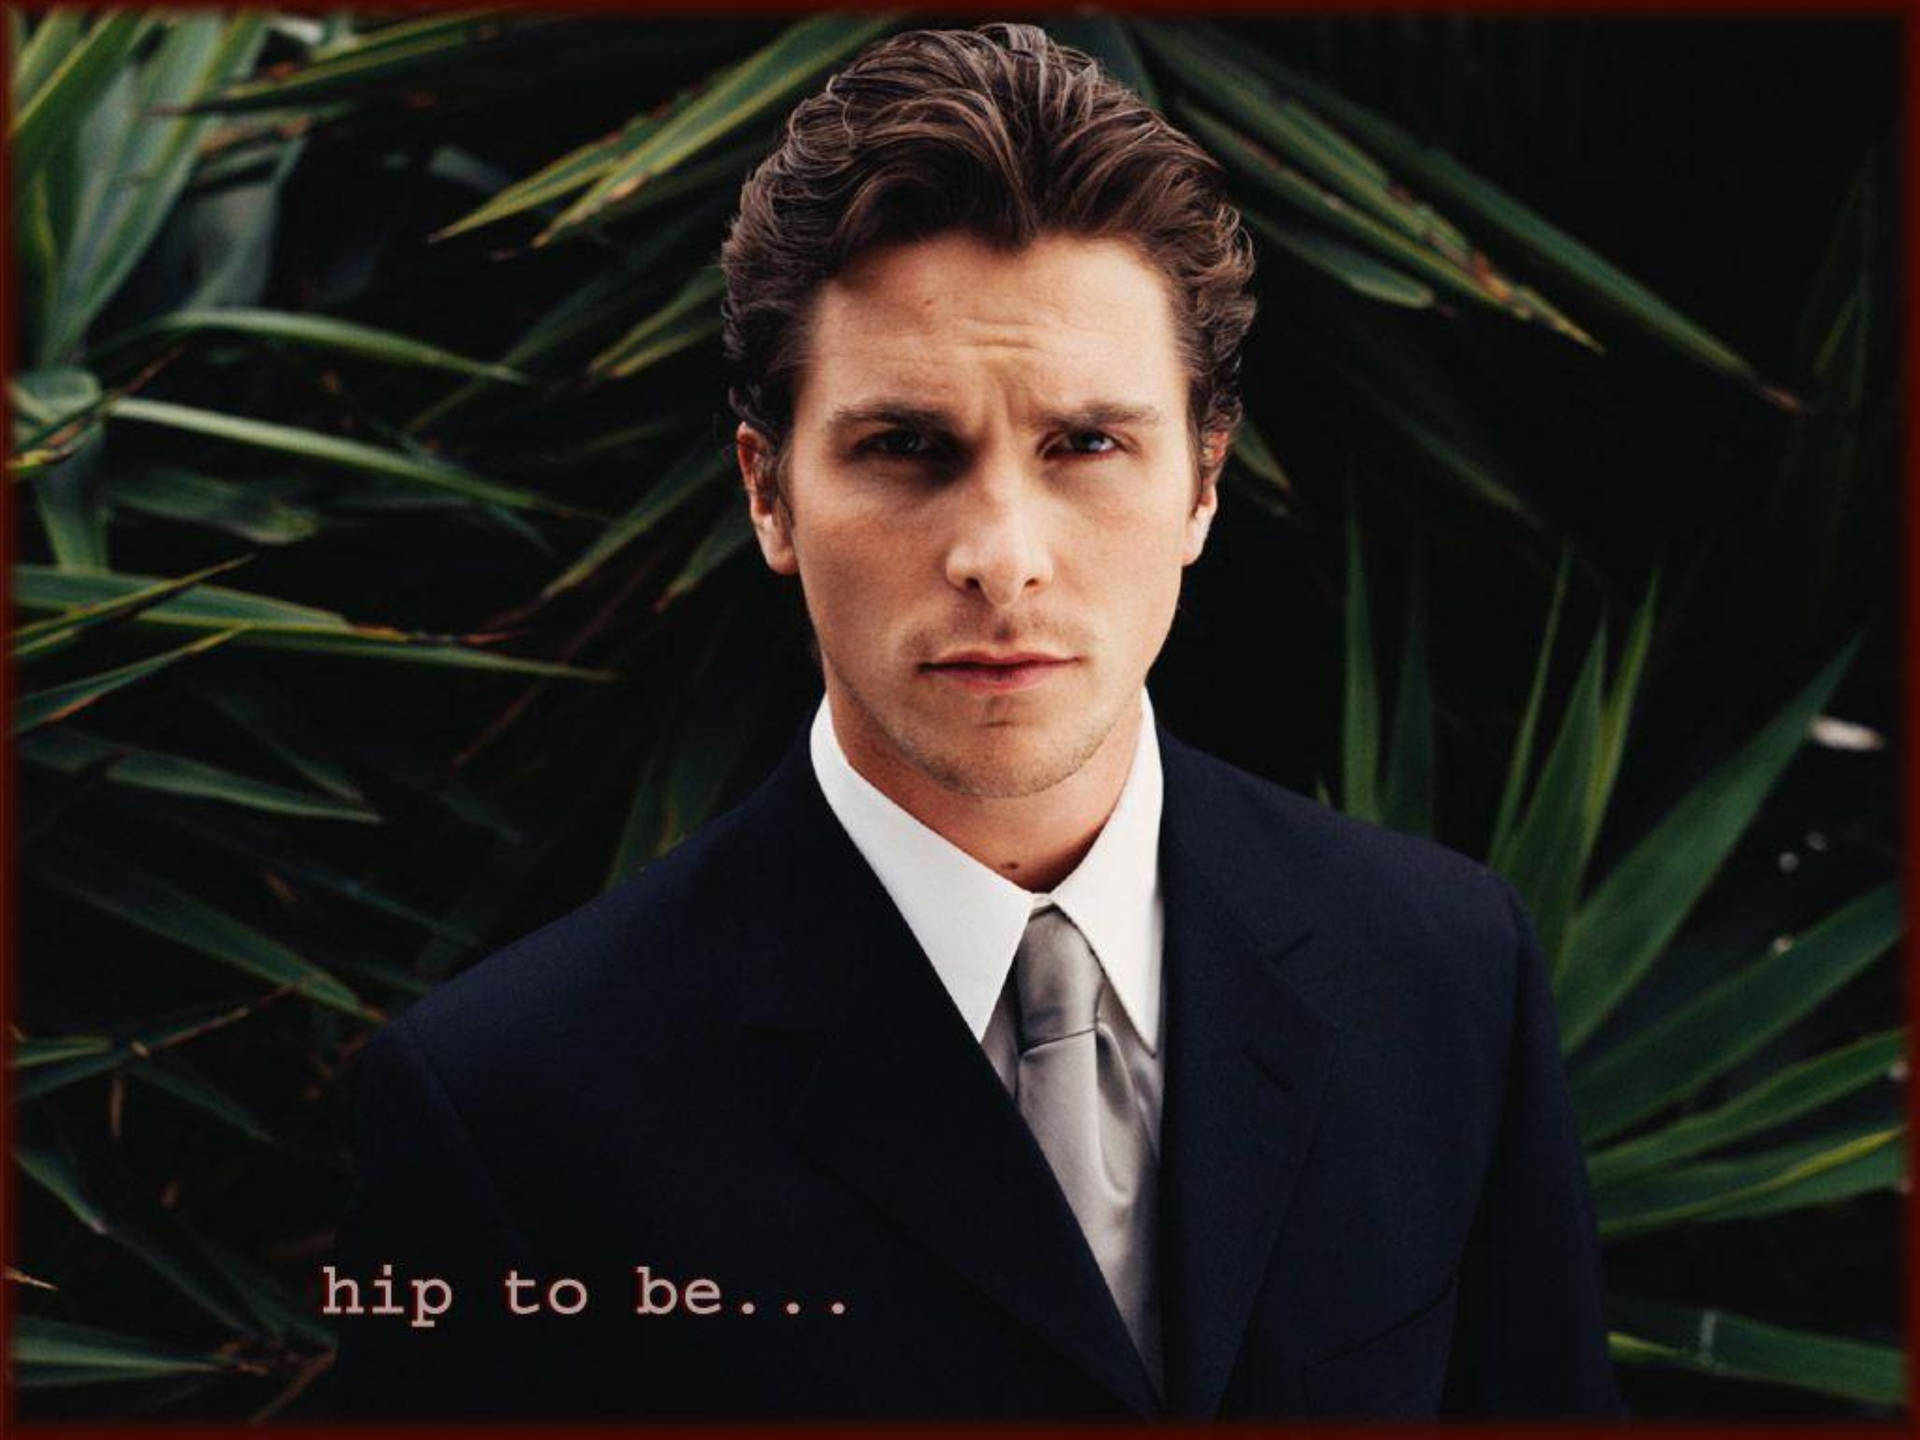 Christian Bale Hip To Be Background